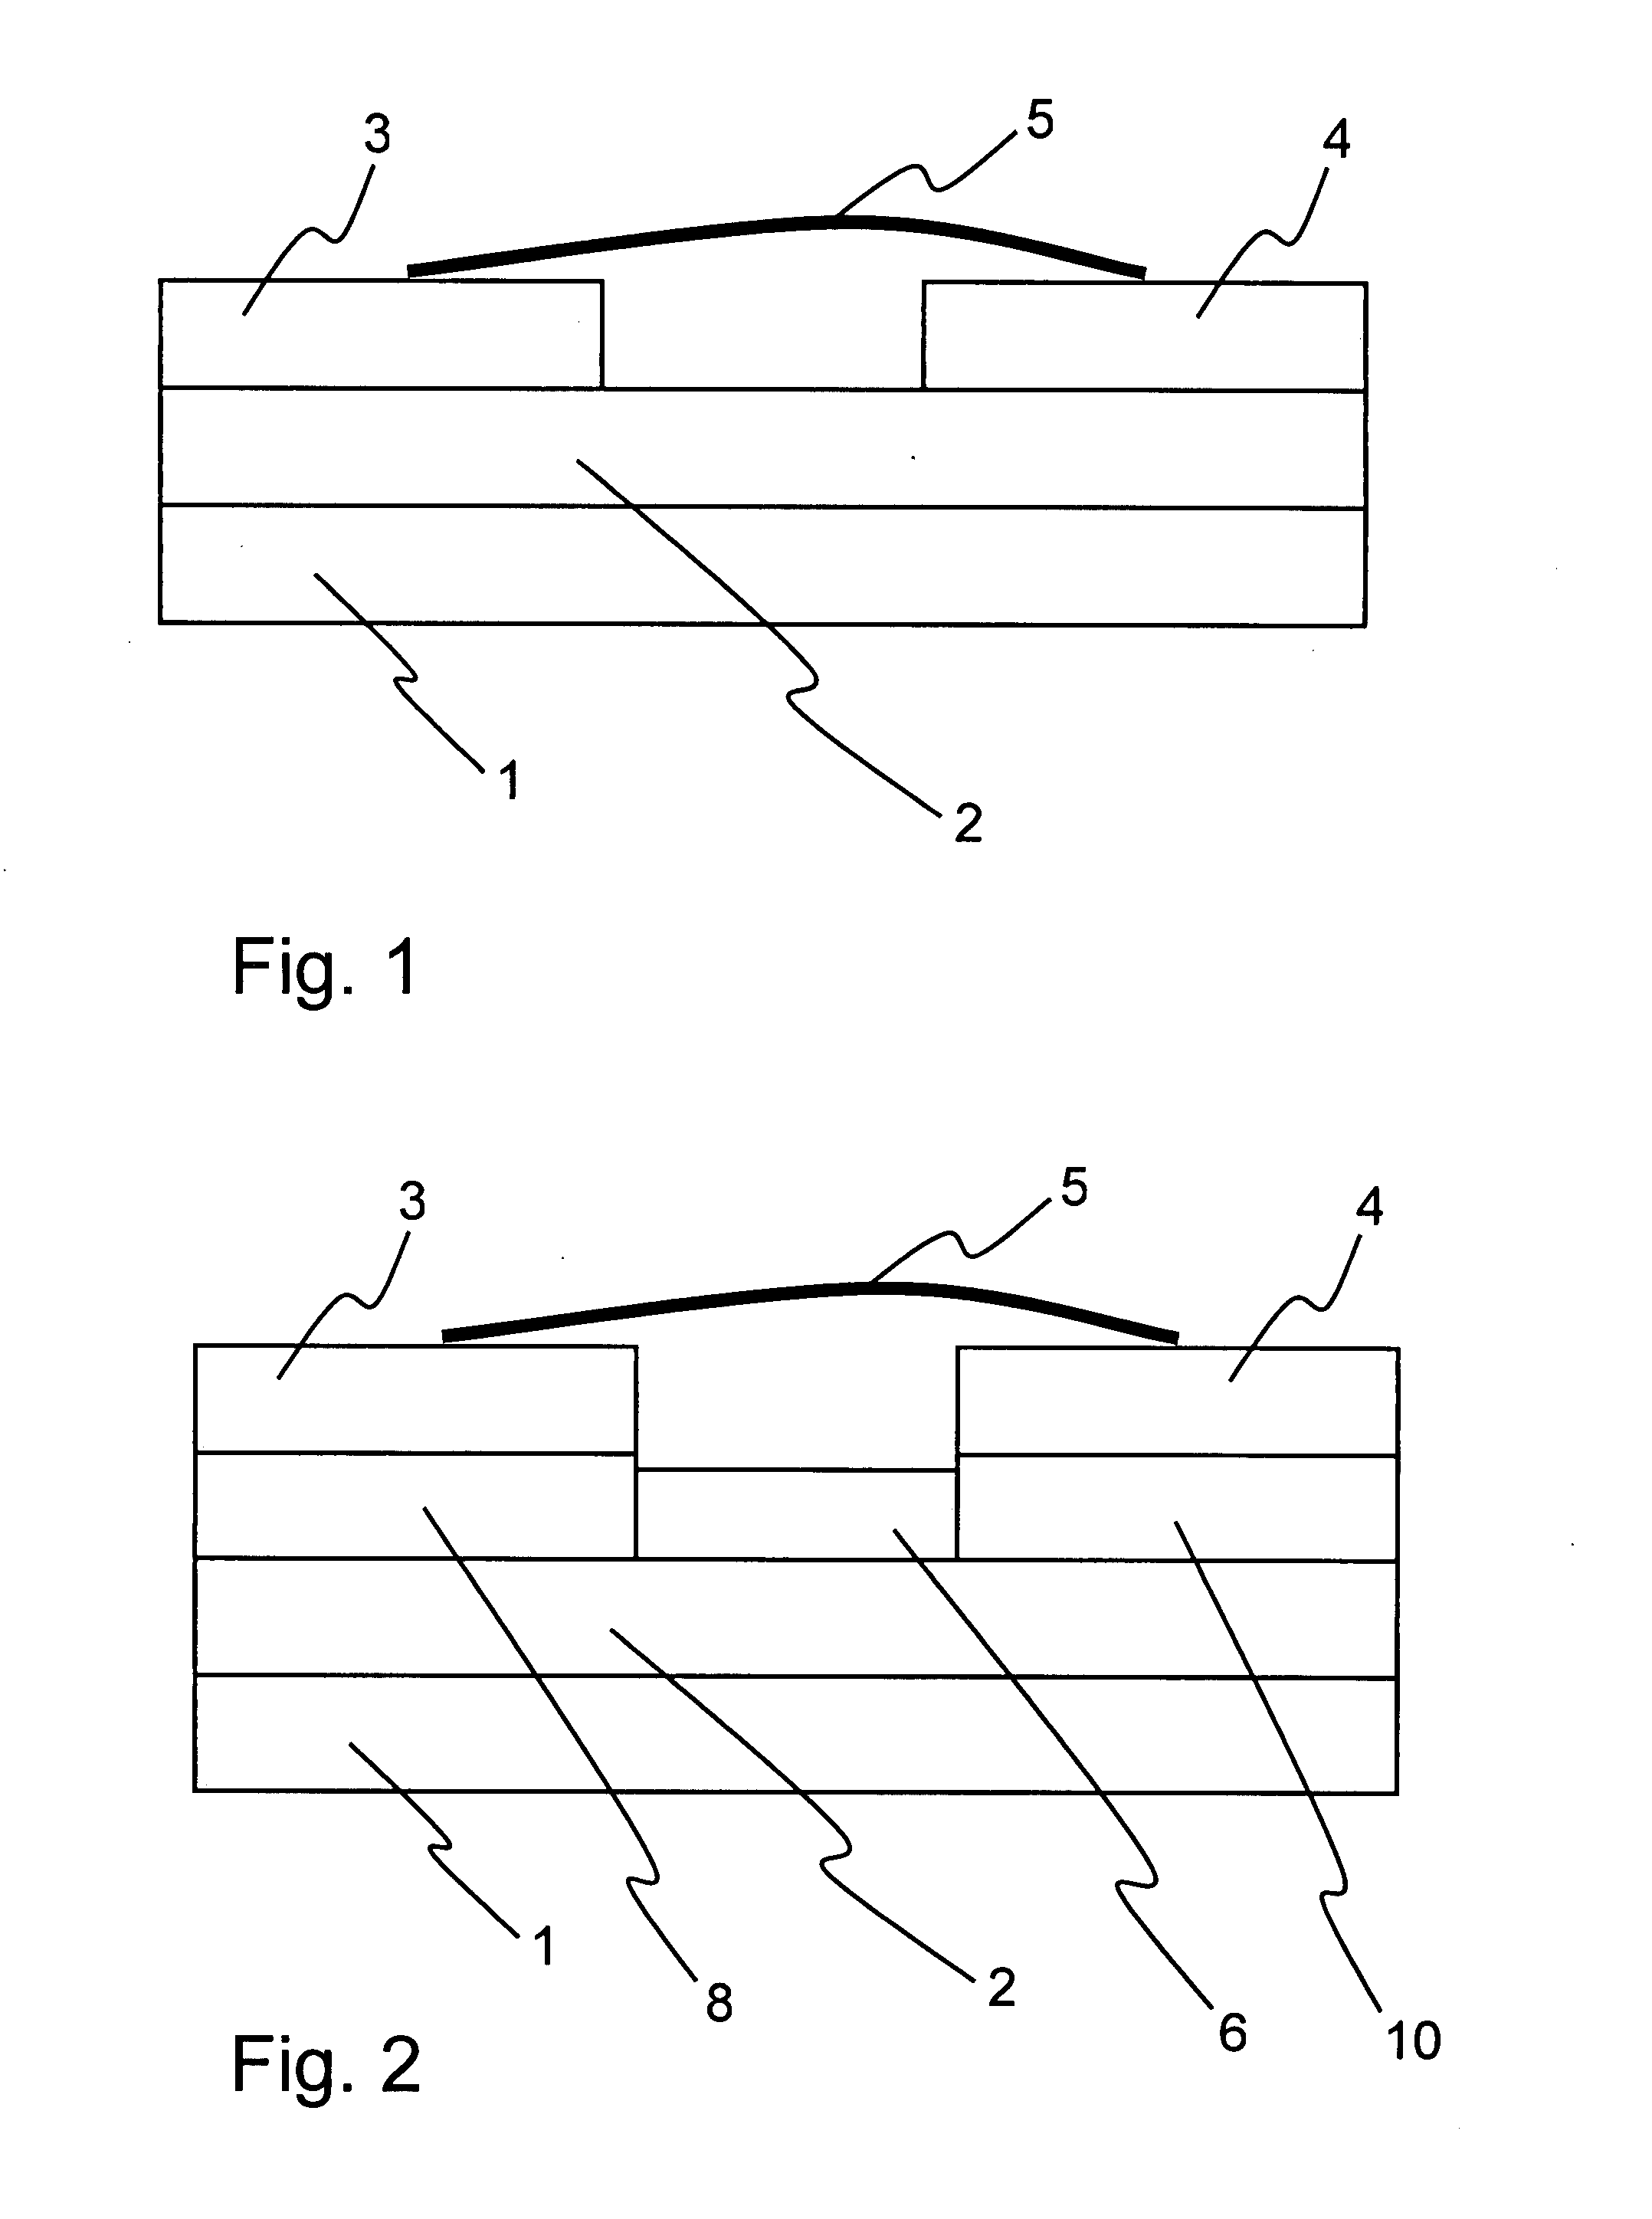 Carbon nanotube field effect transistor and method of making thereof